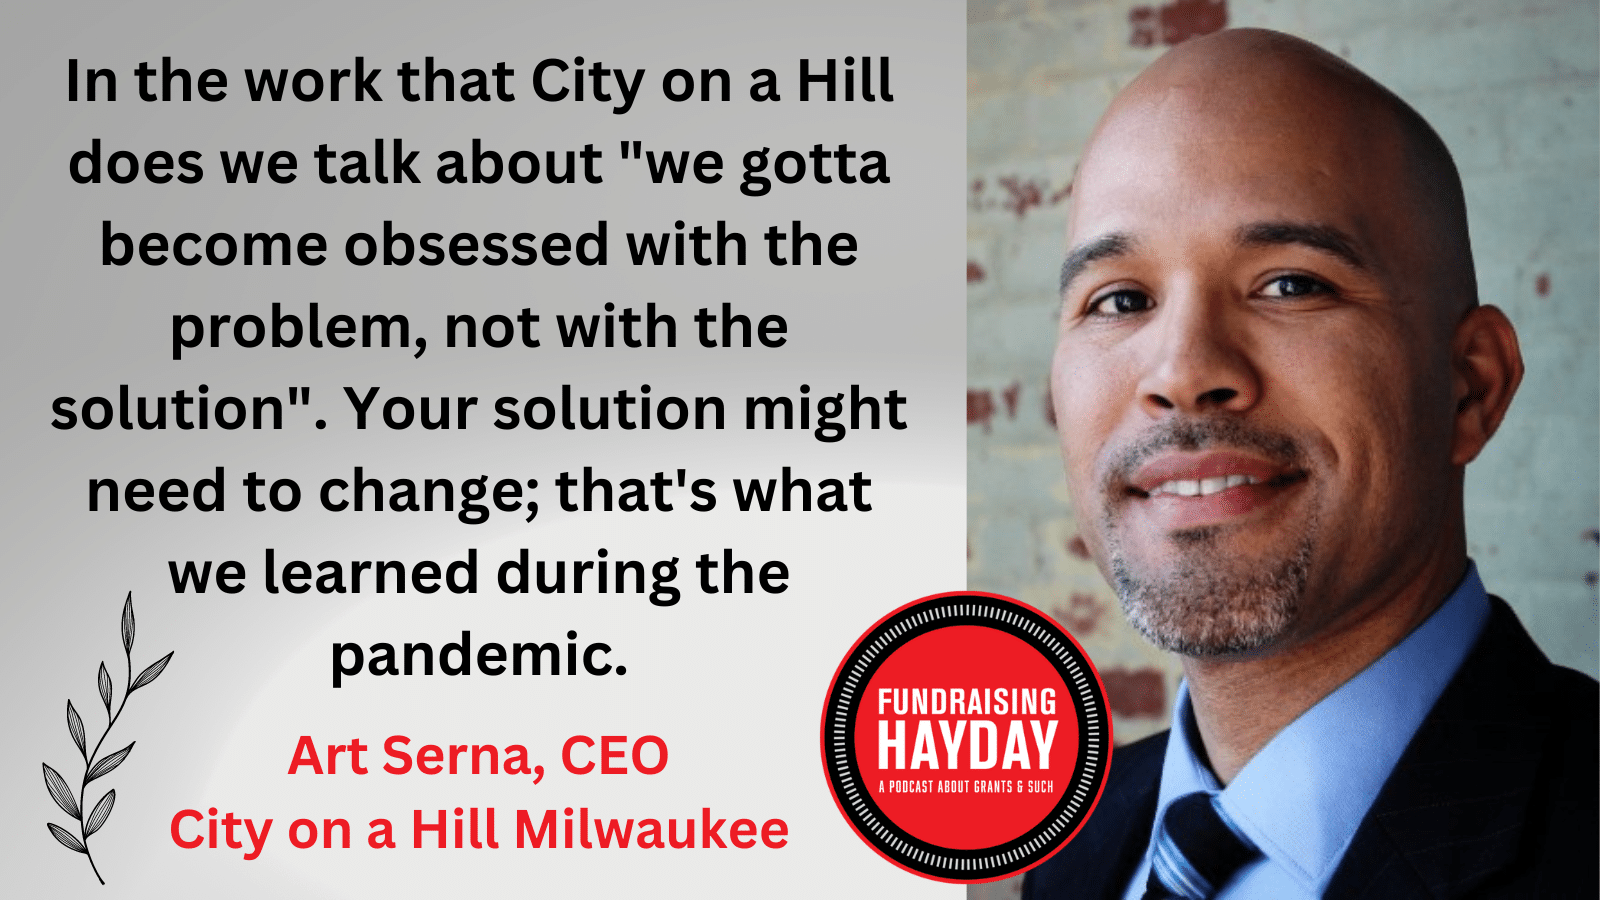 City on a Hill Milwaukee: On a Mission to Break the Cycle of Generational Poverty